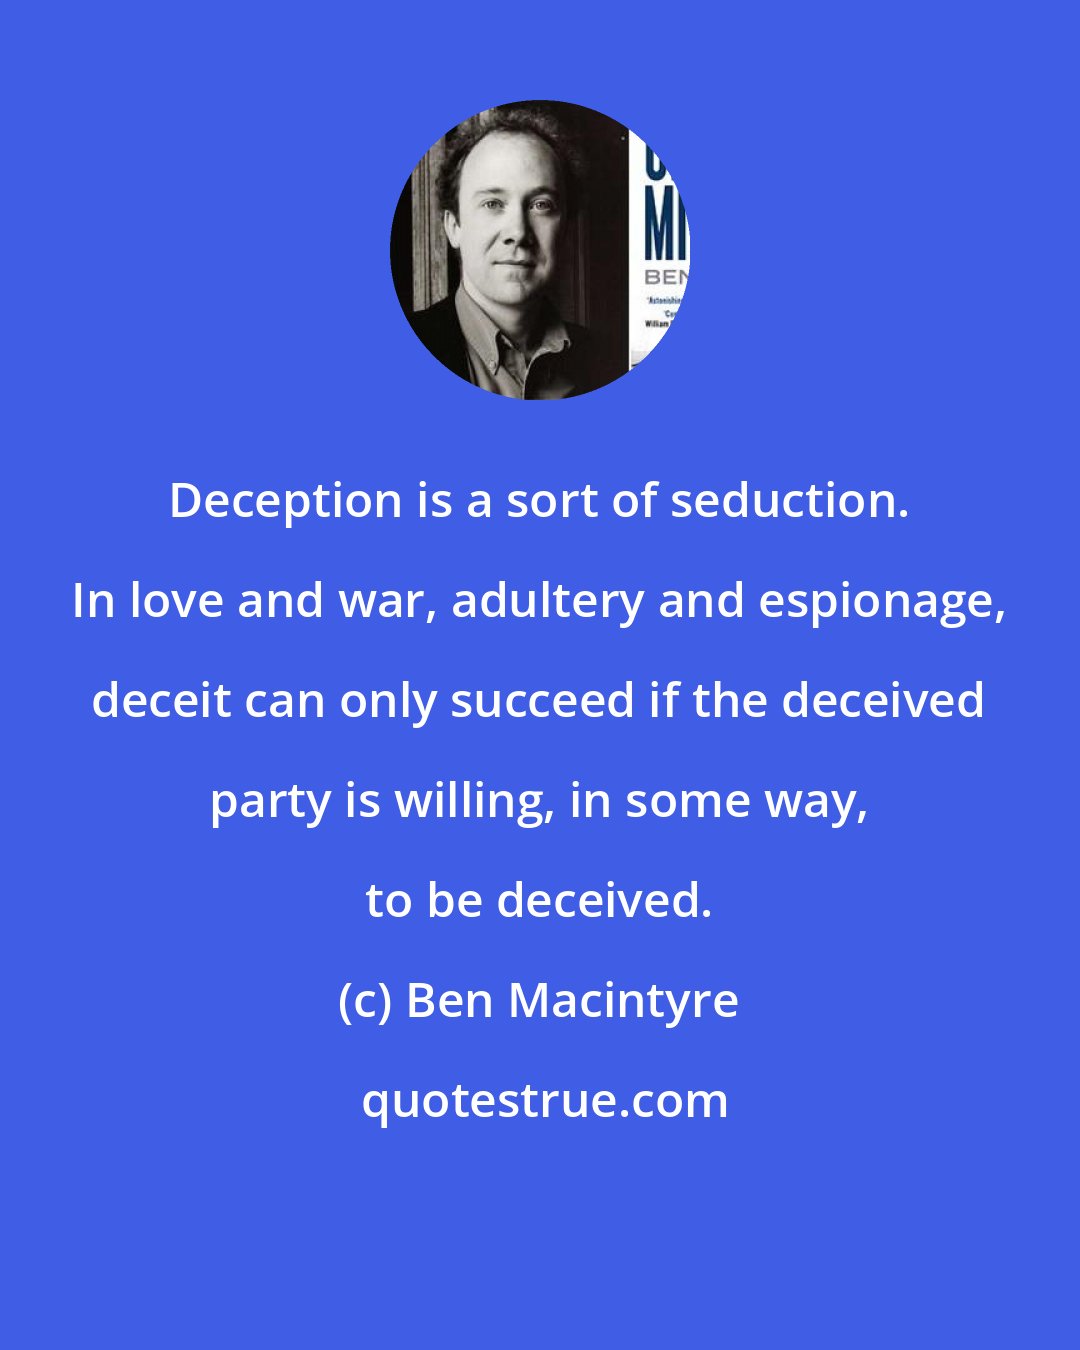 Ben Macintyre: Deception is a sort of seduction. In love and war, adultery and espionage, deceit can only succeed if the deceived party is willing, in some way, to be deceived.